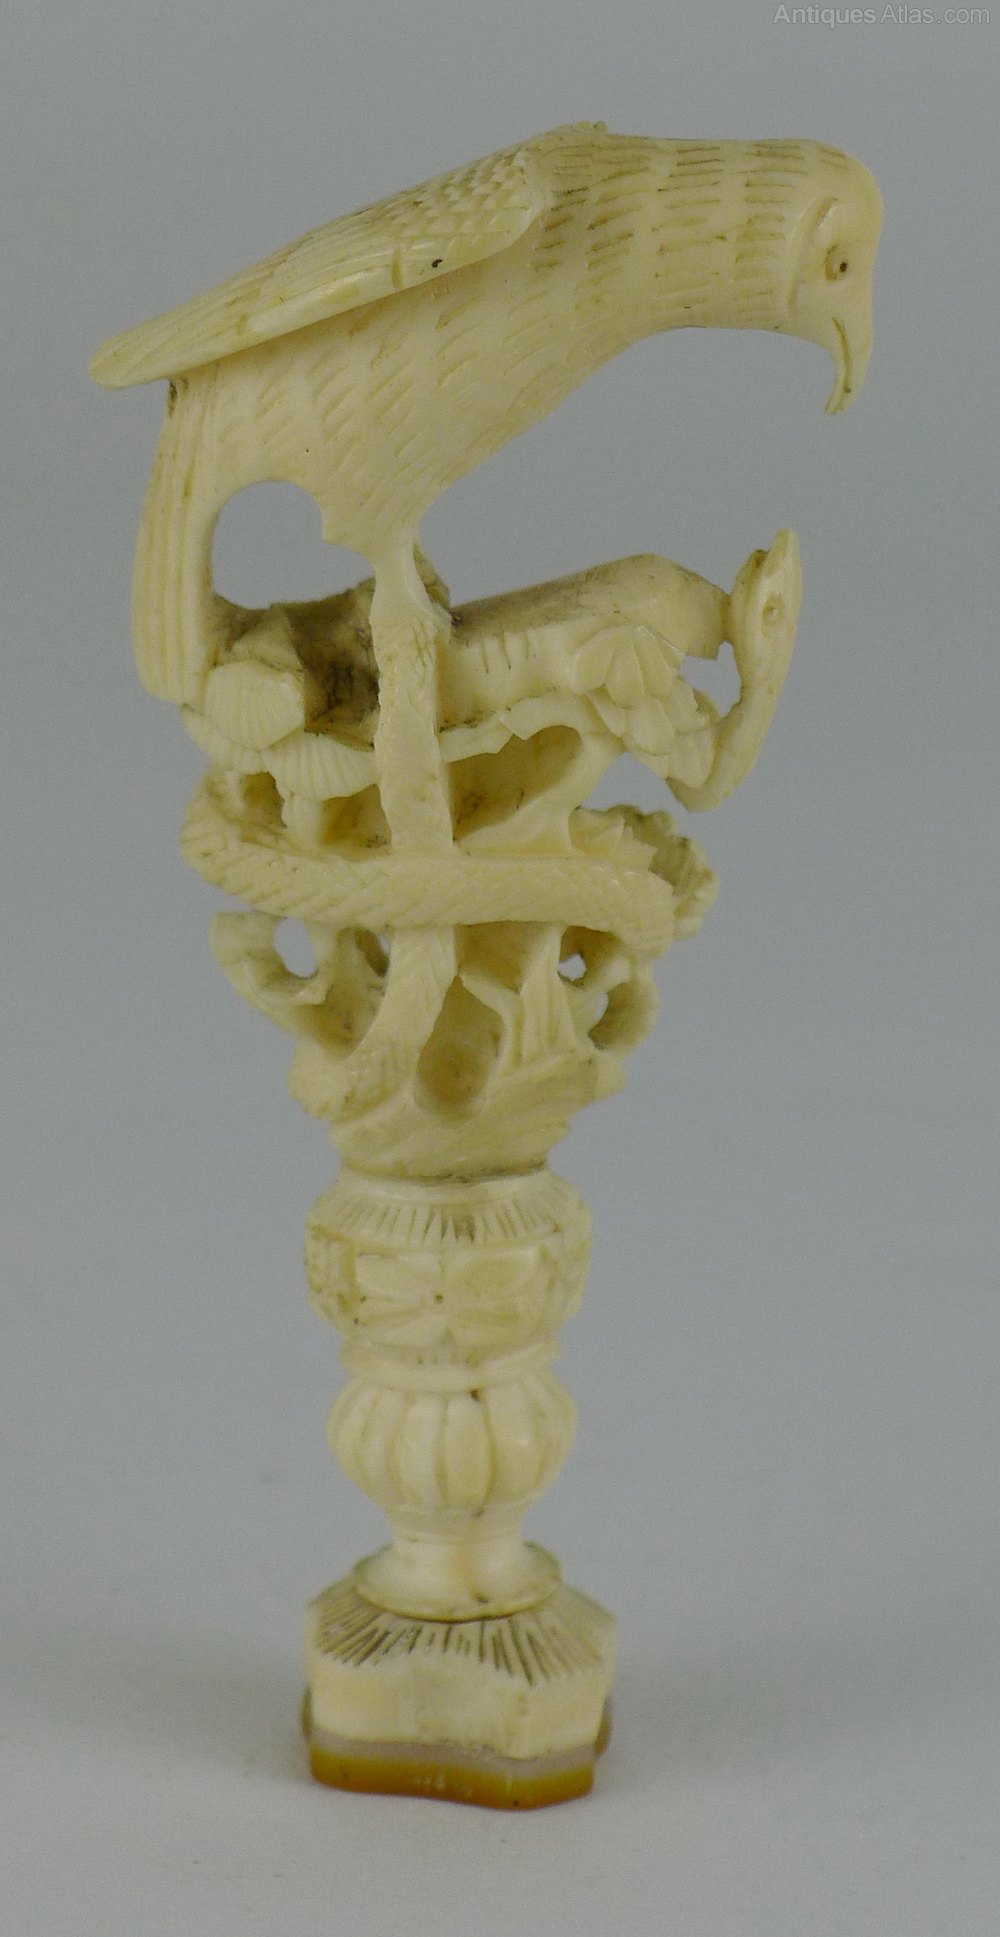 Antiques Atlas - 19th Century Chinese Stamp Seal Ivory Carving